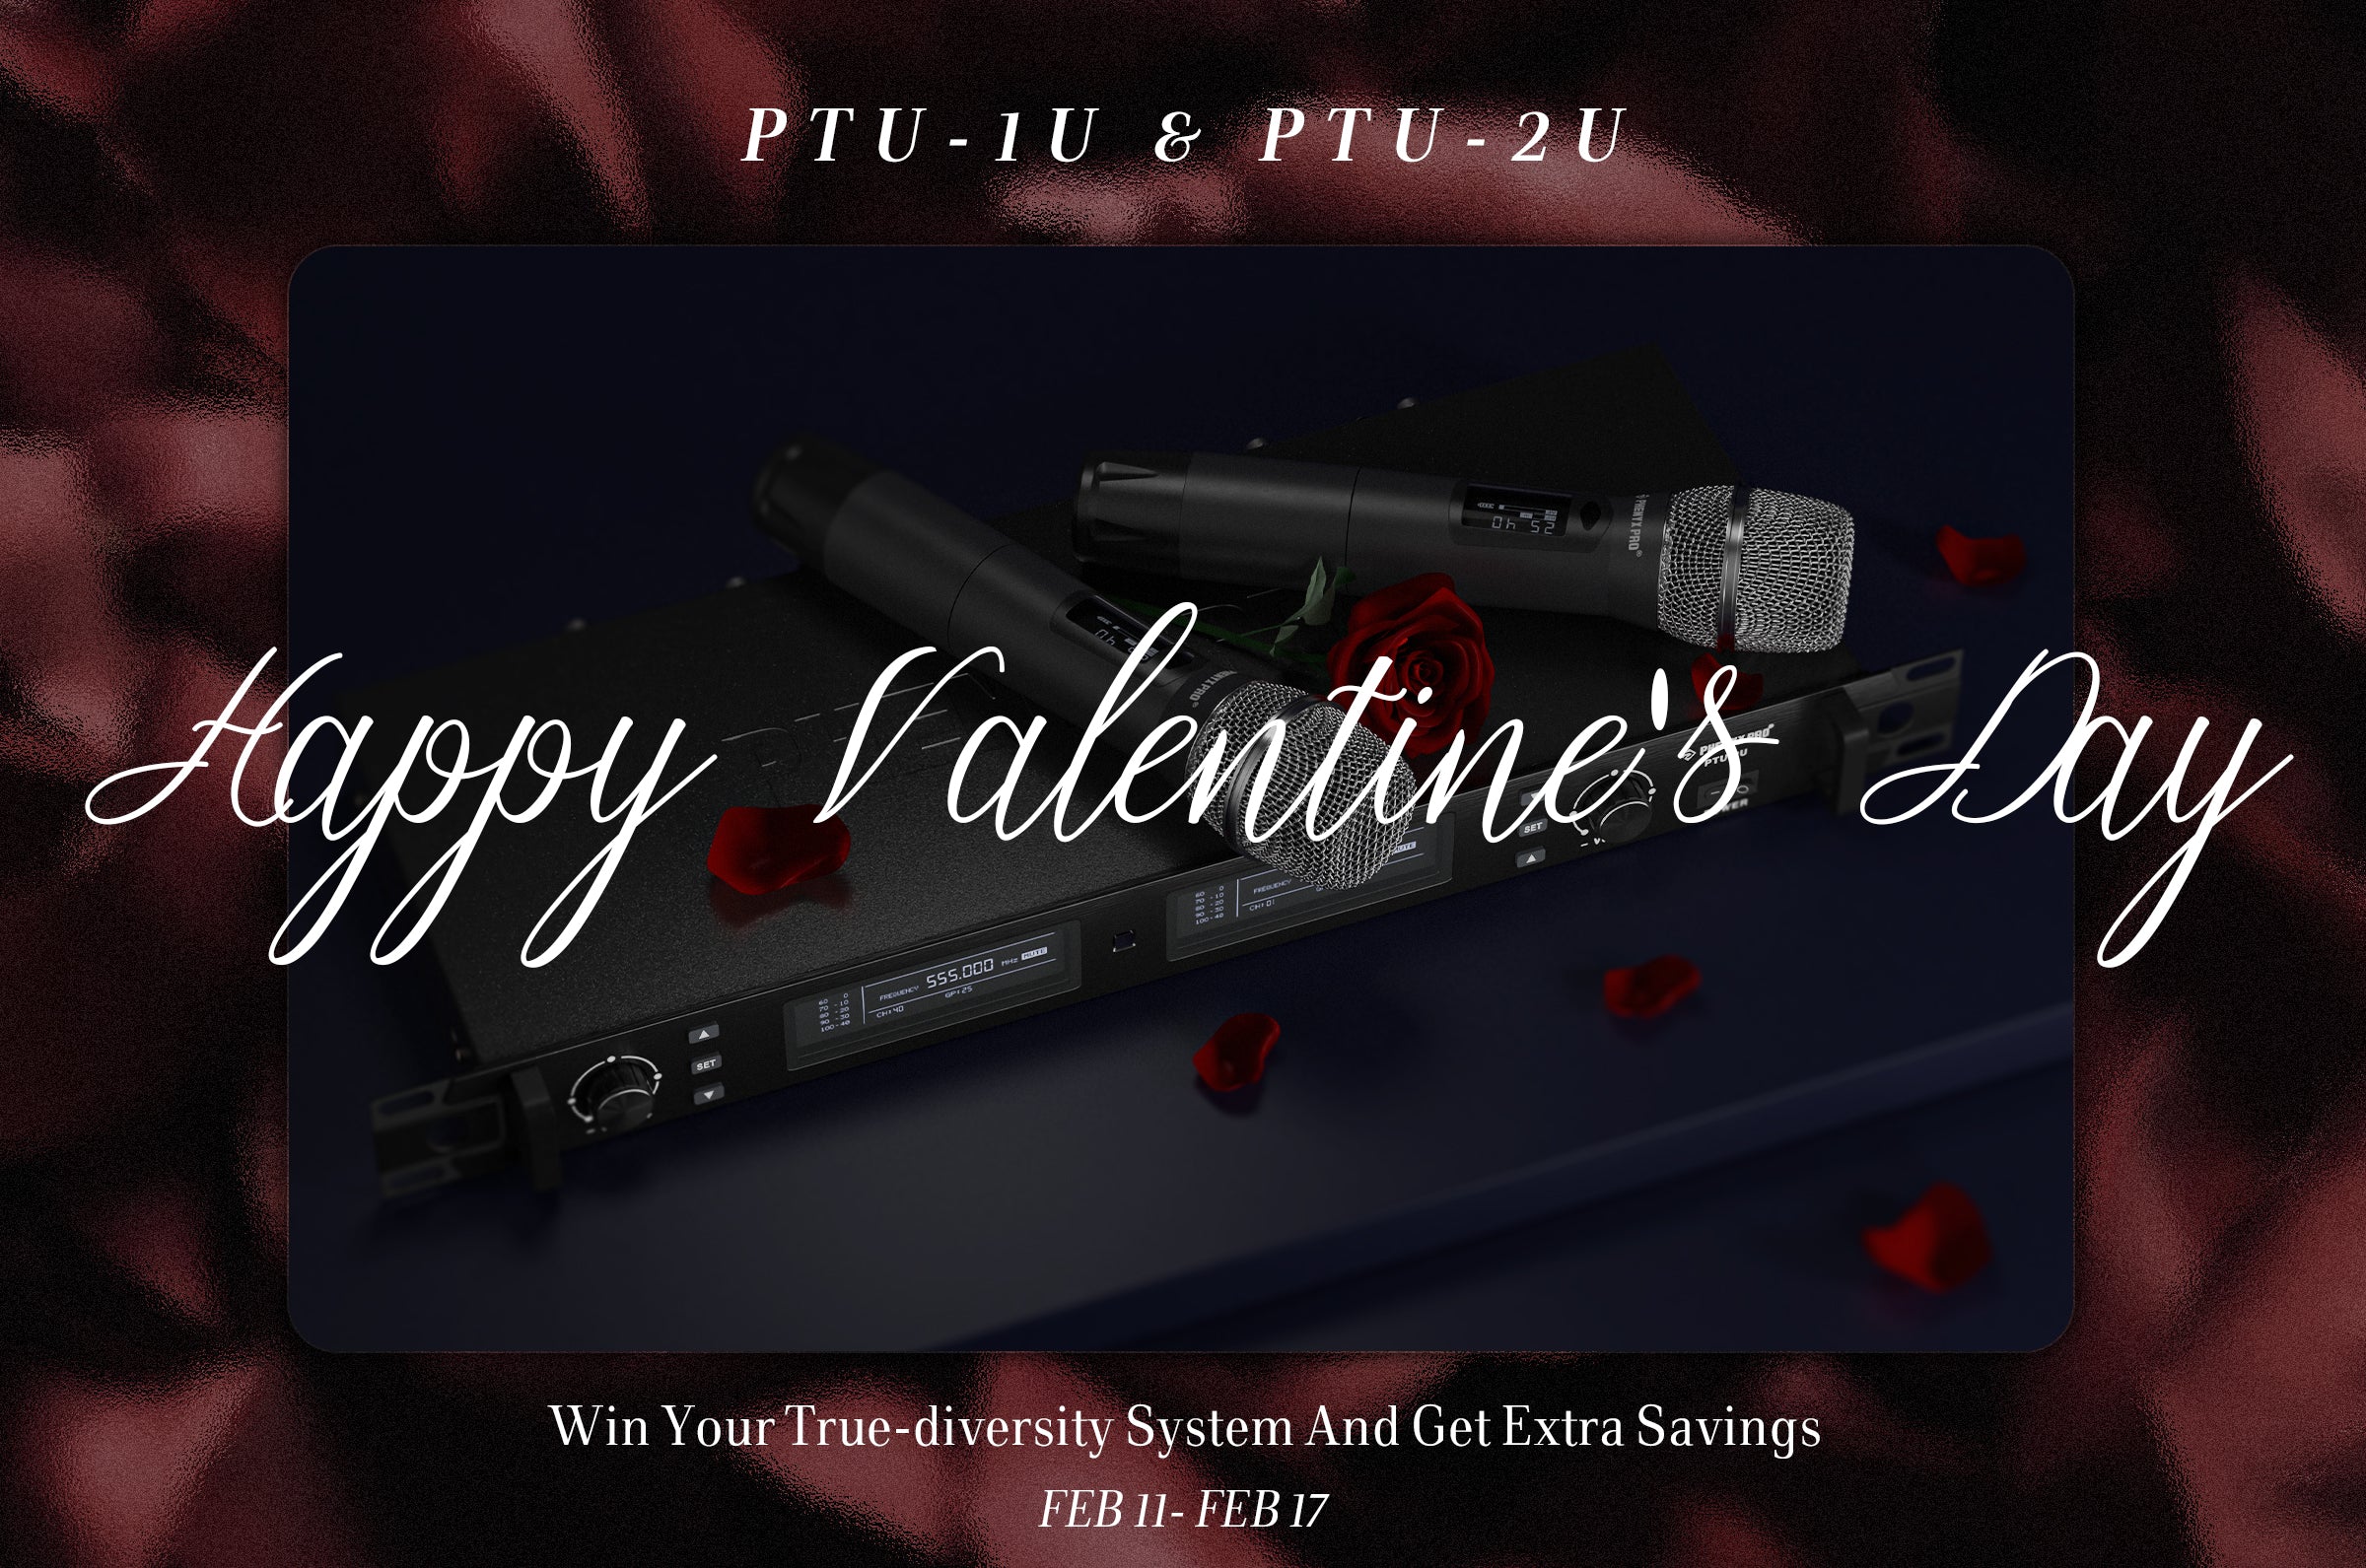 2023 Valentine’s Day Giveaway & Savings! Jump right in!